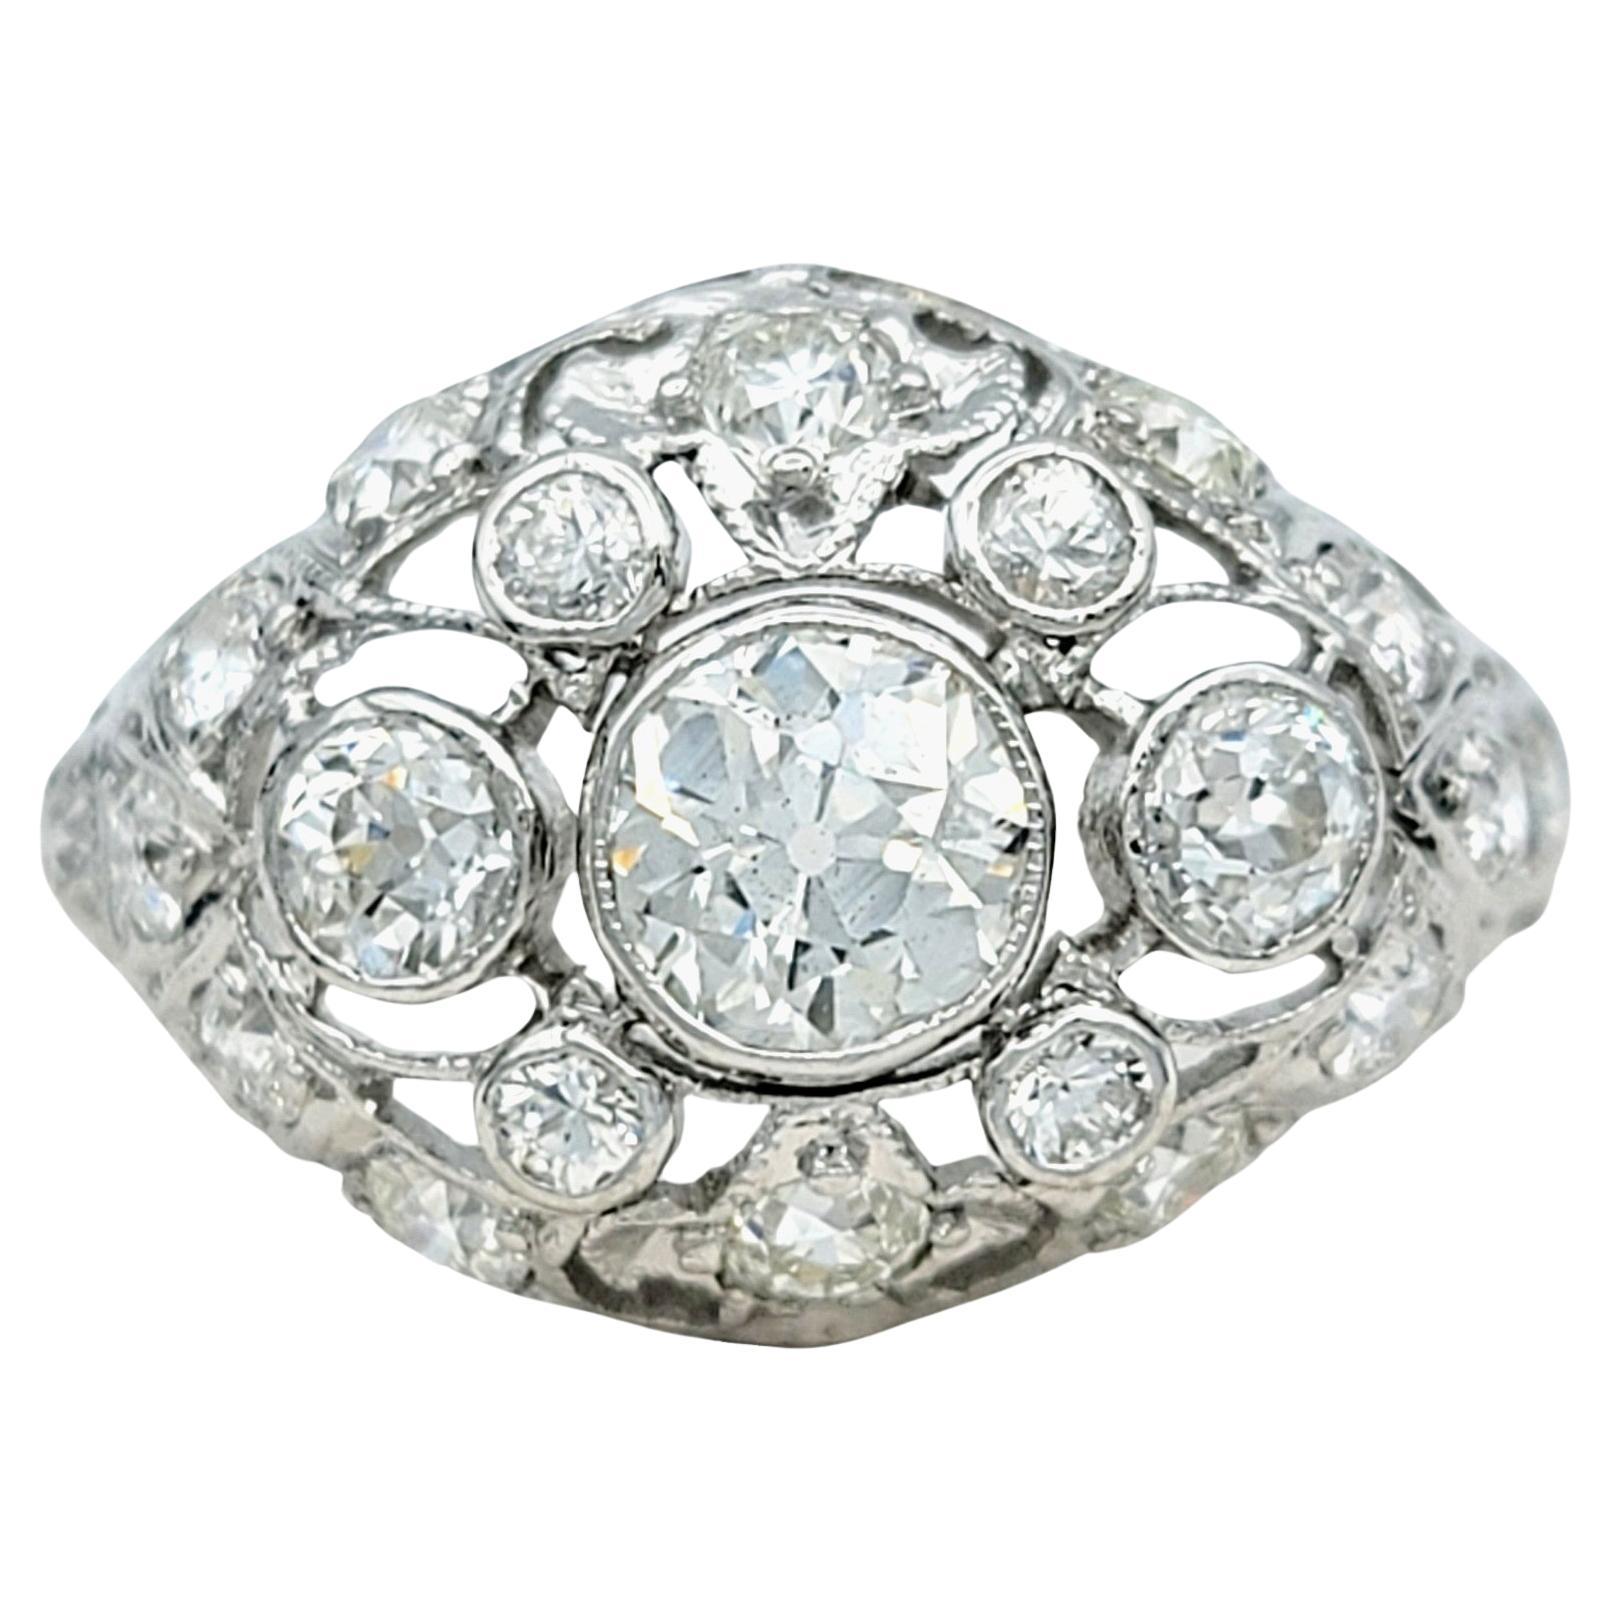 Vintage Cluster Round Diamond Dome Cocktail Ring Set in 14 Karat White Gold For Sale